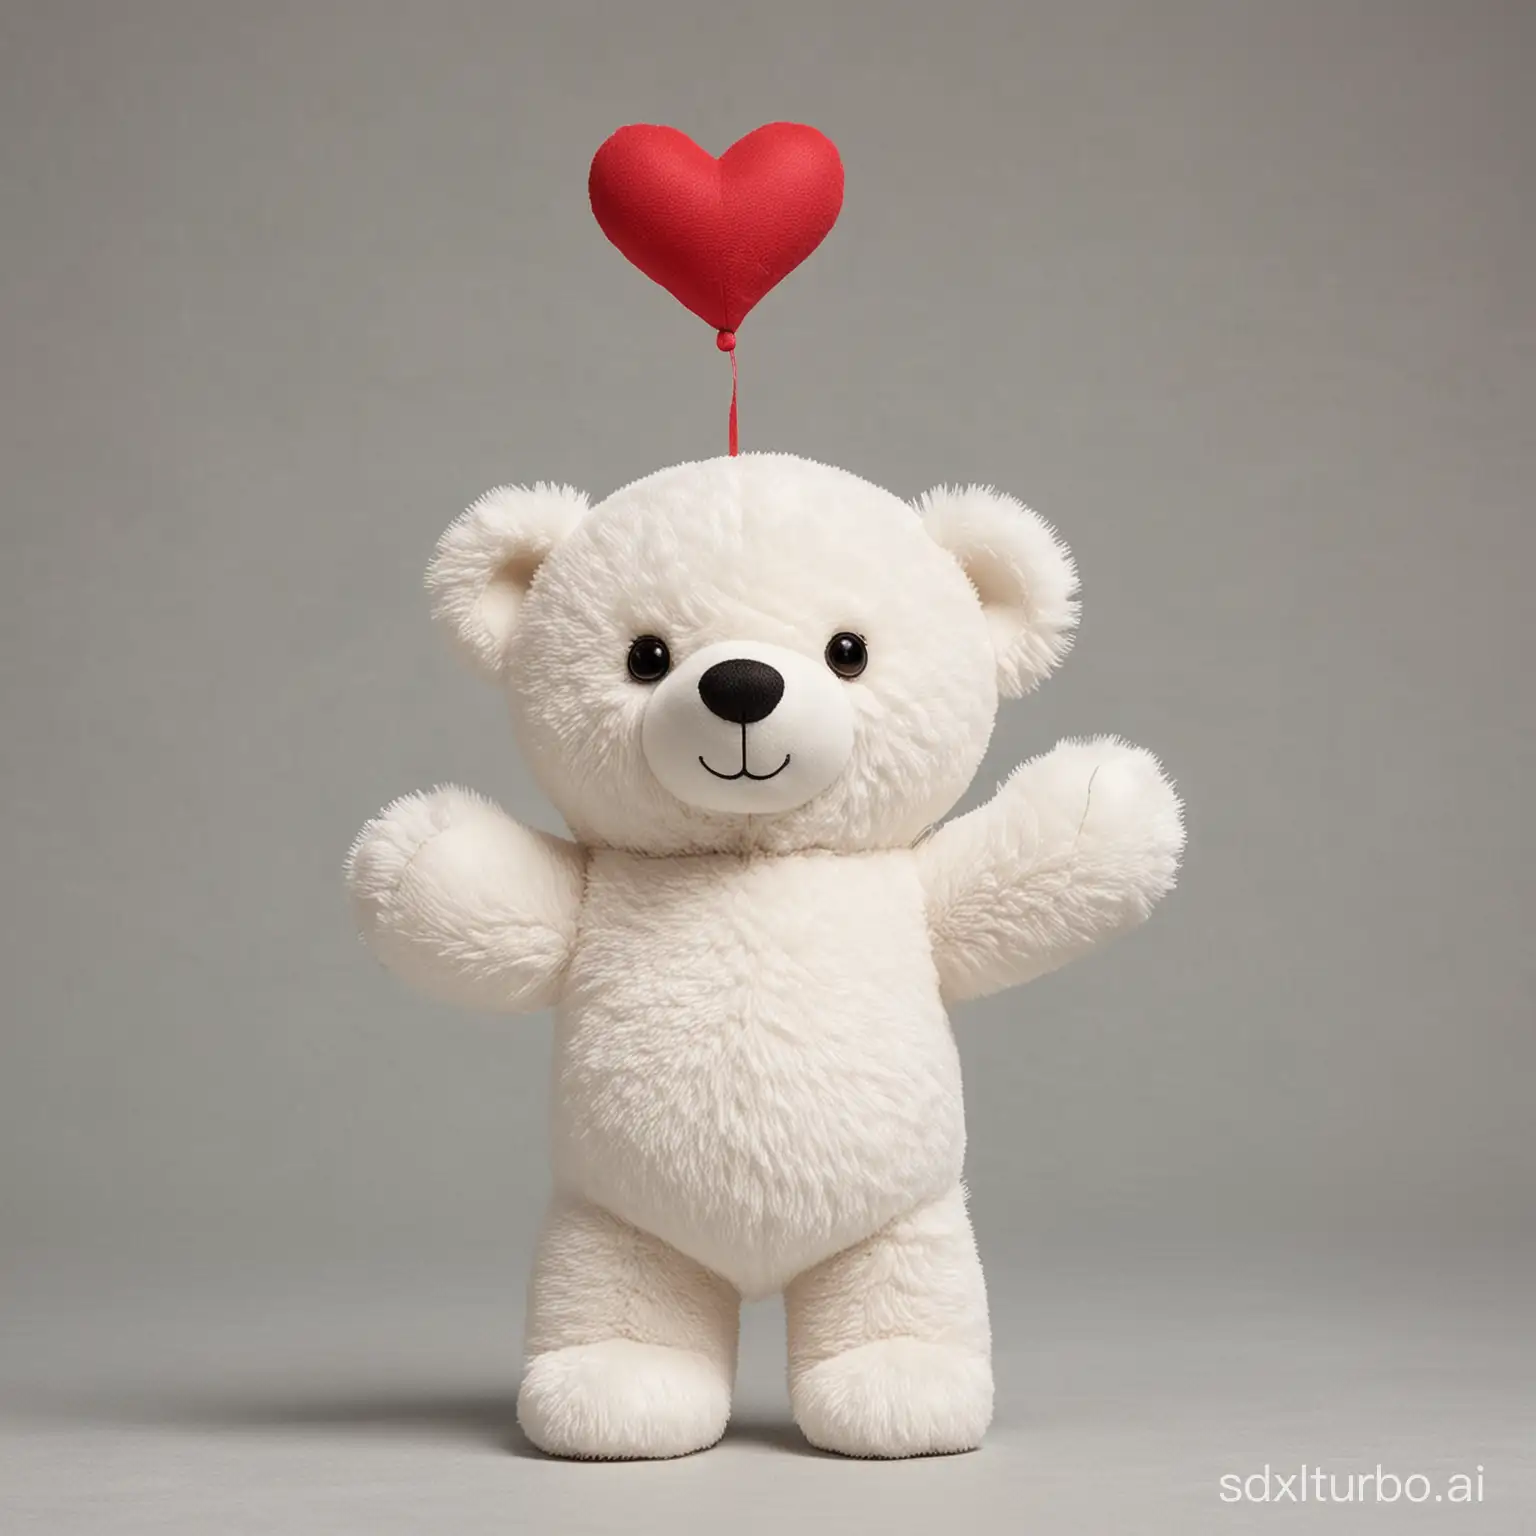 Graceful-White-Teddy-Bear-Statue-with-Hand-Raised-in-HalfHeart-Gesture